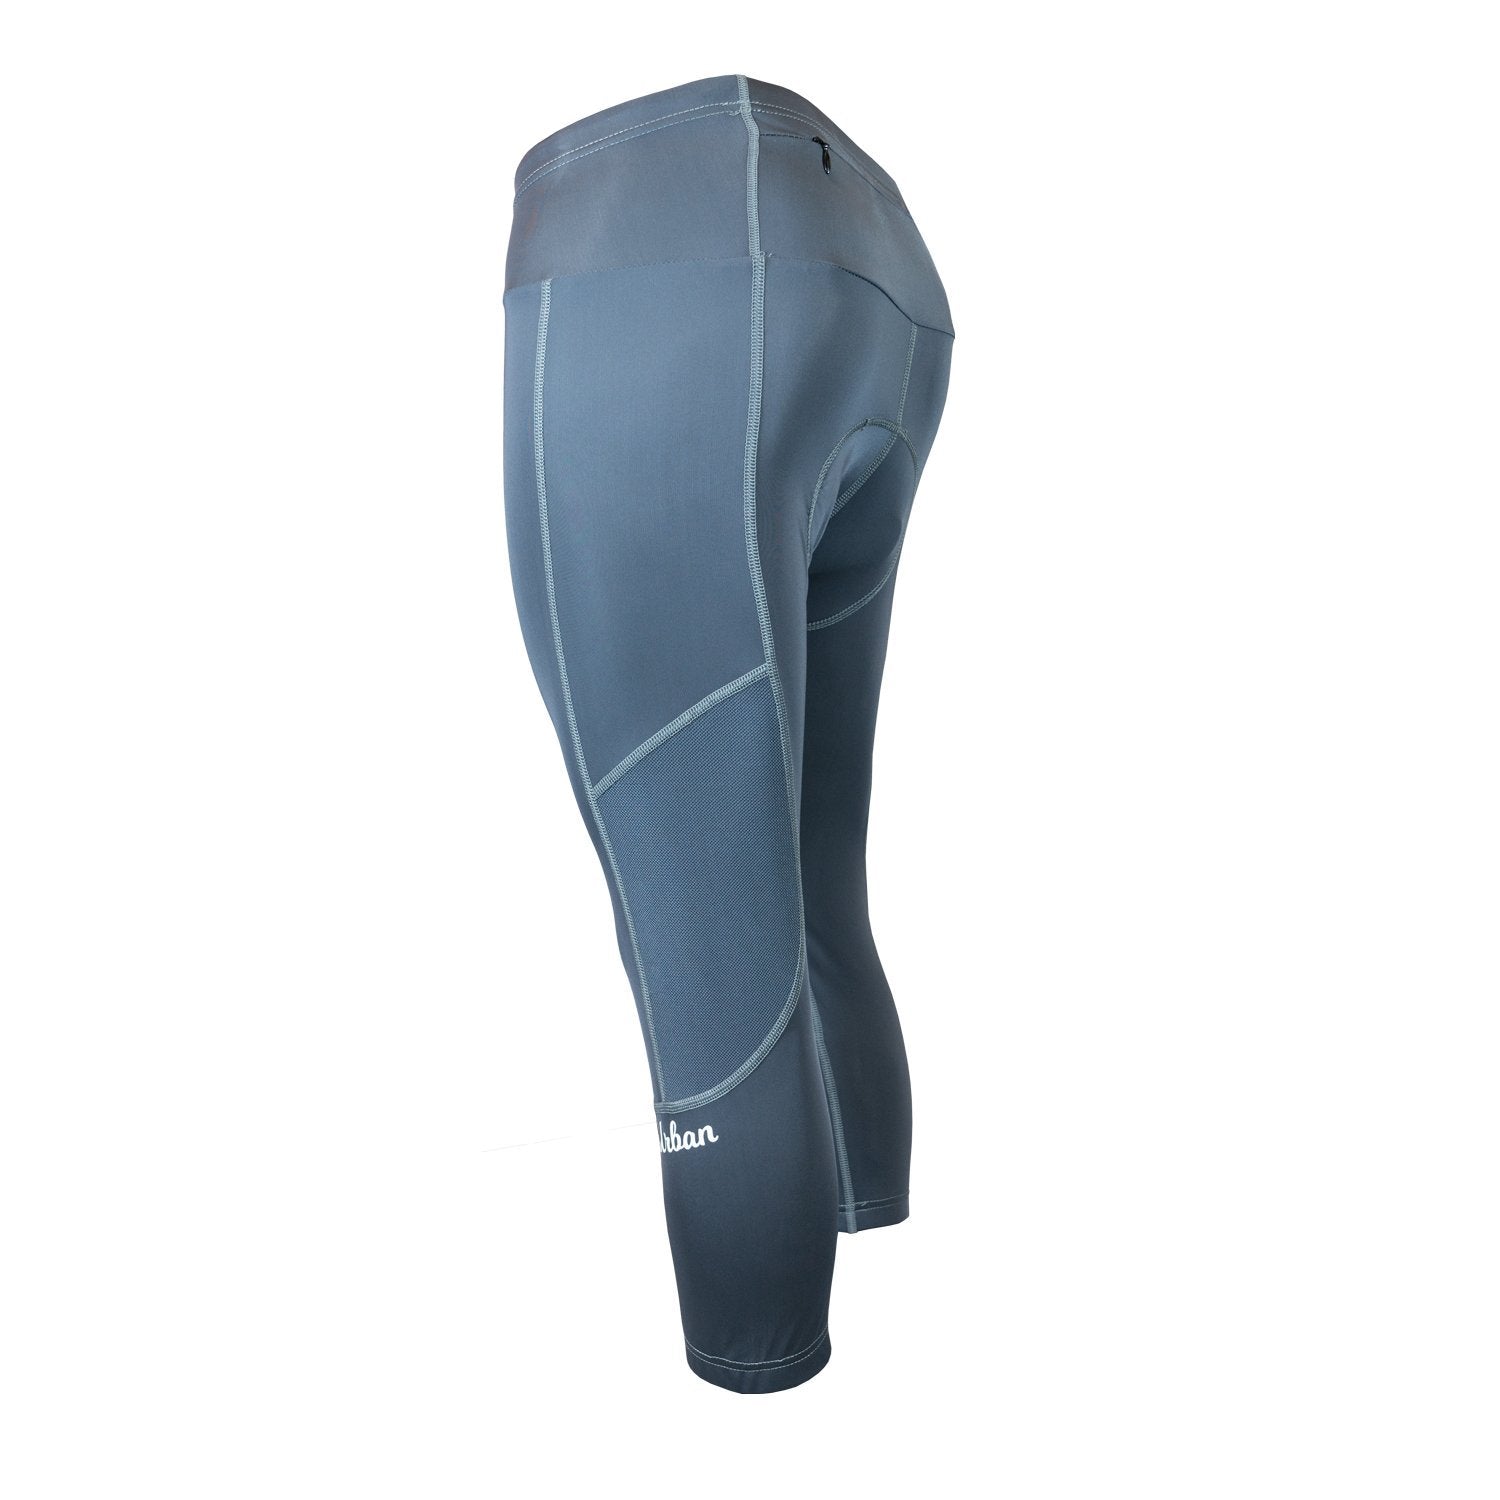 Do you recommend wearing these under padded bike shorts or over them? ( Compression Pants, Spandex Base Layer Tights